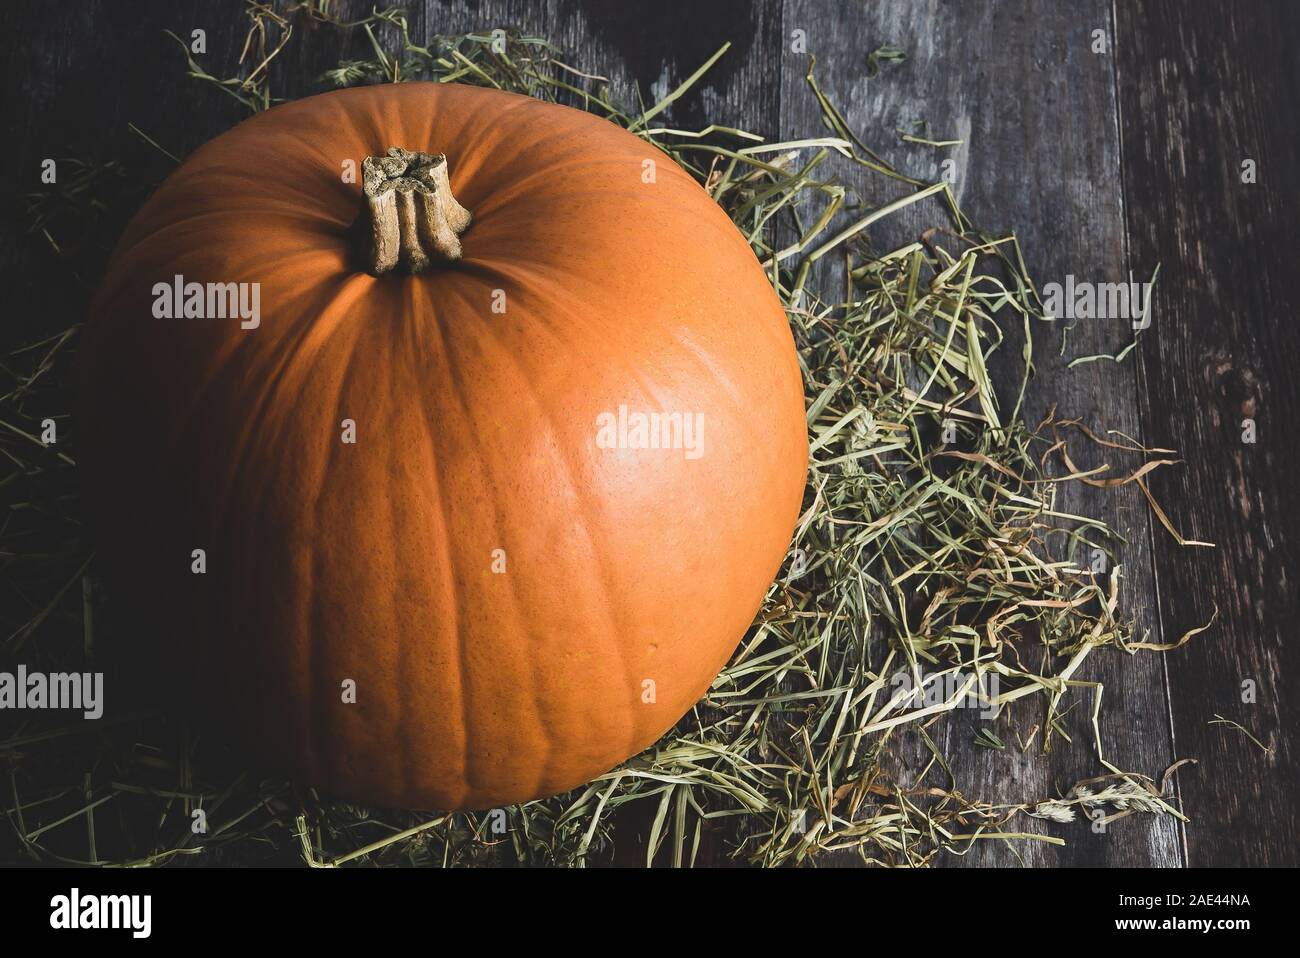 Big rural decorative orange pumpkin on  rustic wooden background with rural hay as festive holiday decor for thanksgiving or halloween. Stock Photo